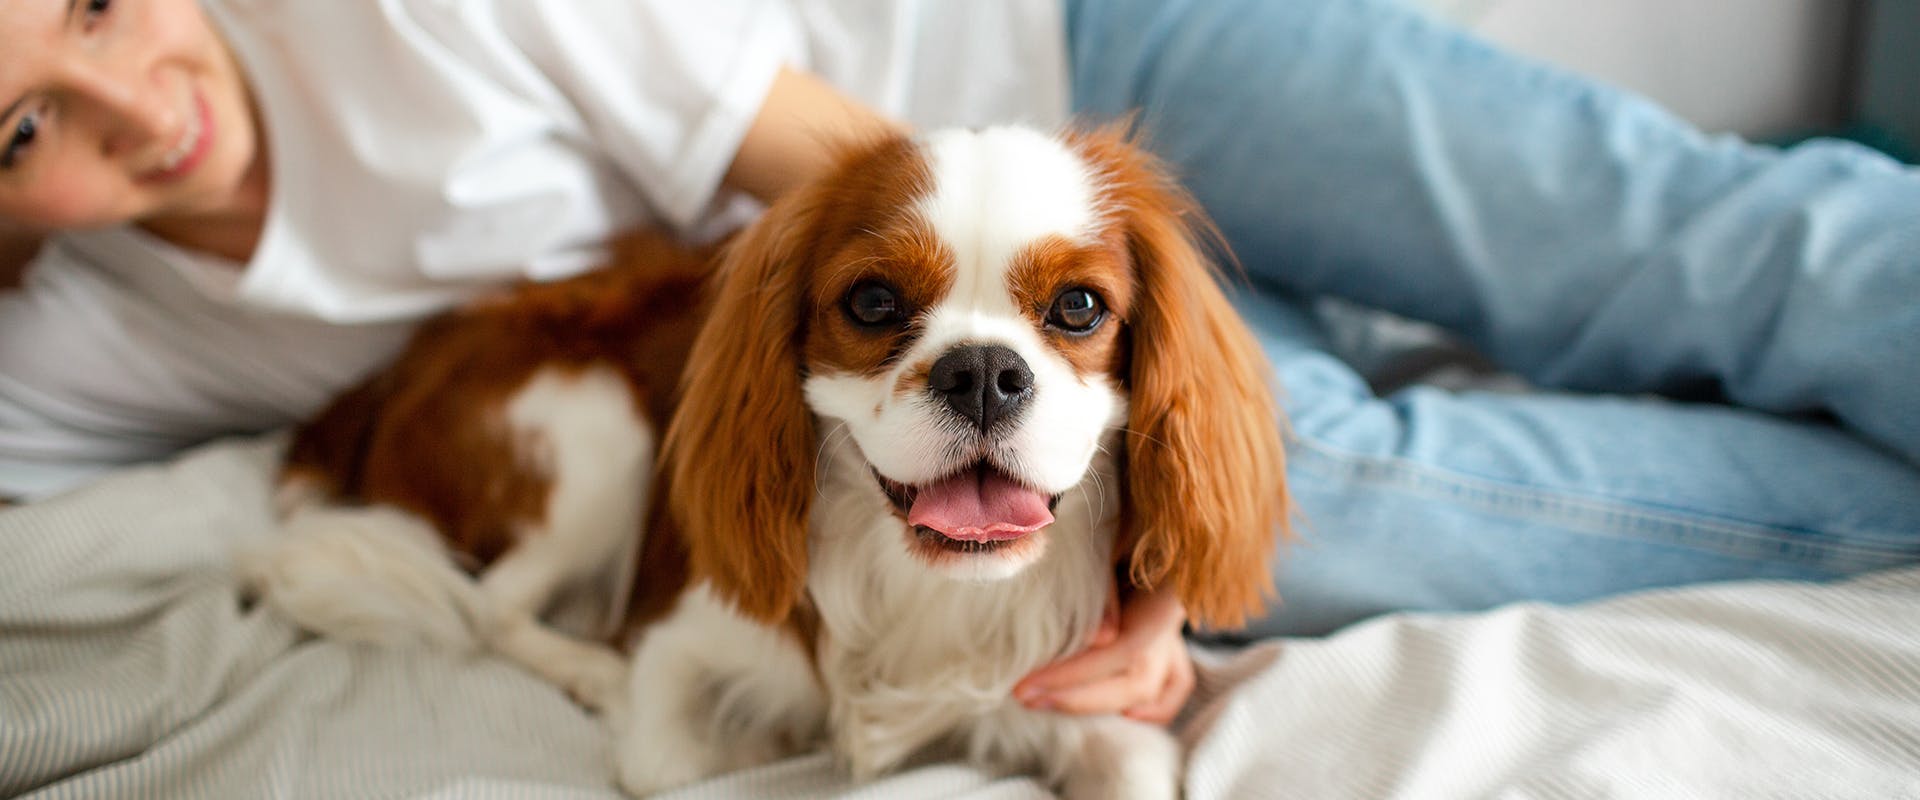 A Cavalier King Charles Spaniel sitting on a bed, cuddled up to a woman 